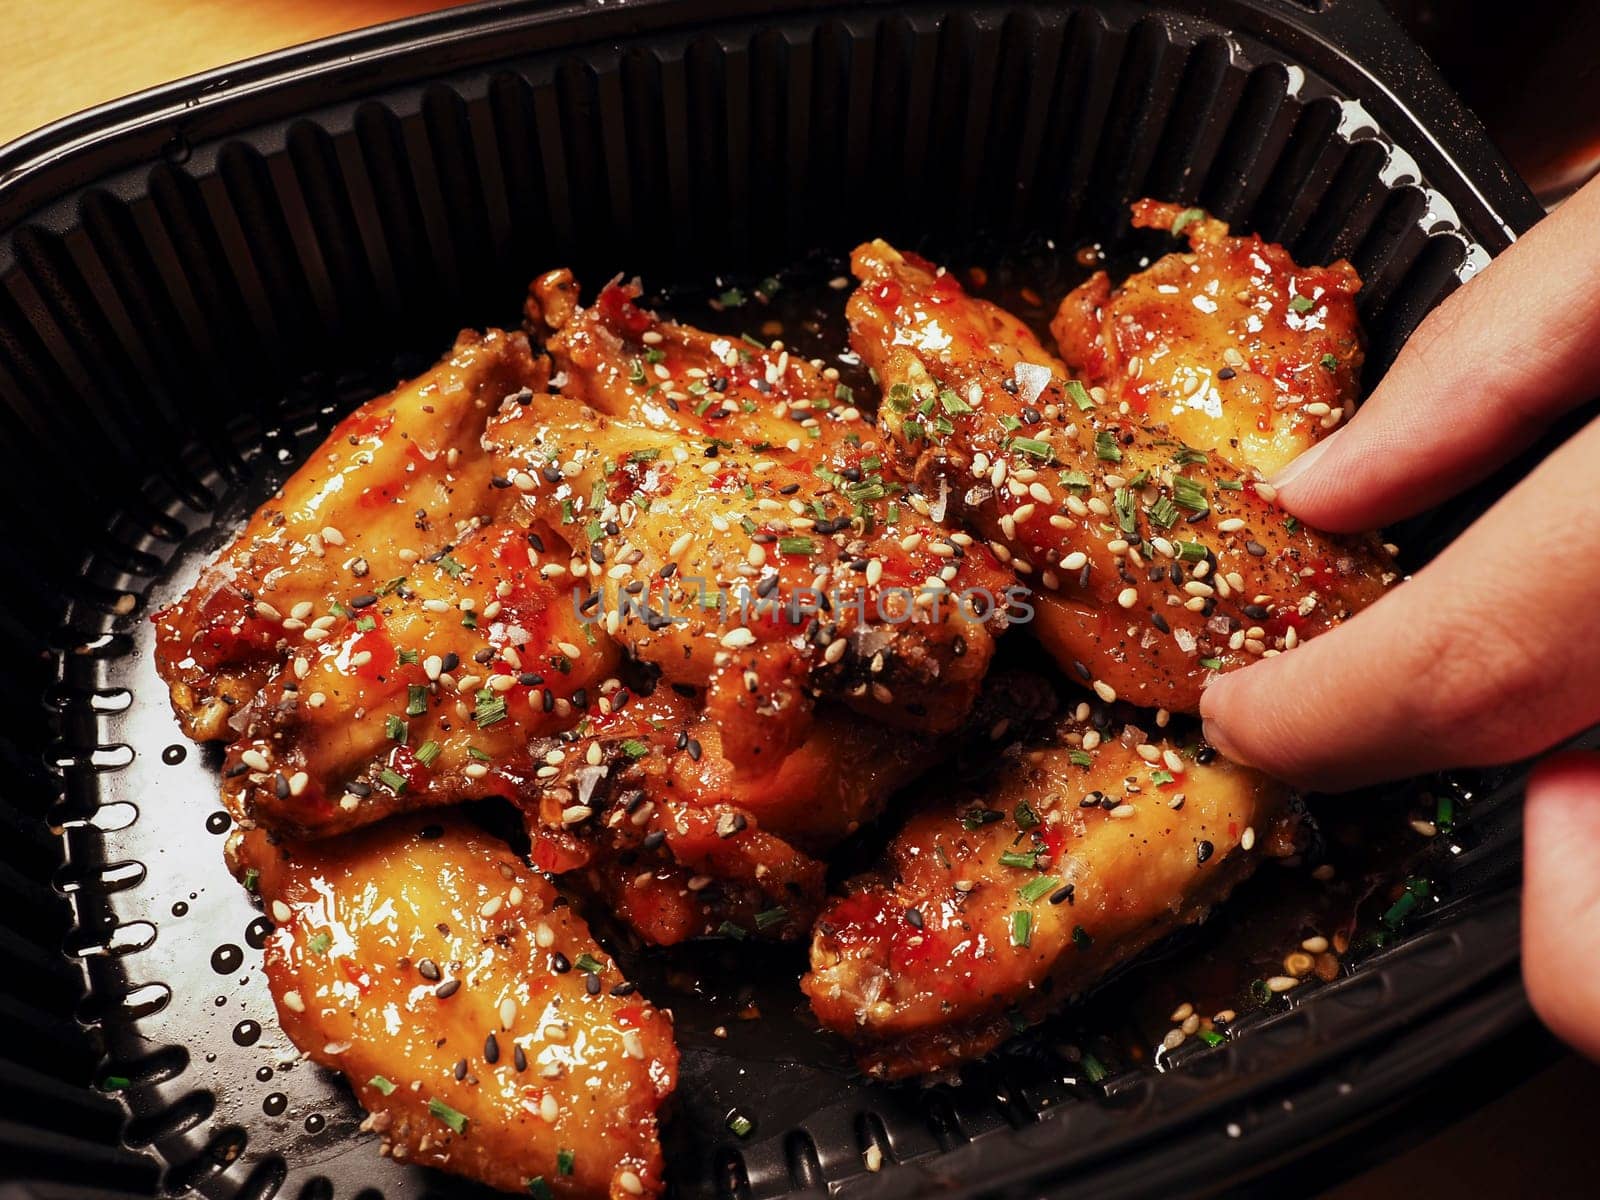 Man's hand picking up a Korean Chicken wings with sauce. 치킨. Asian street food. Delivery concept